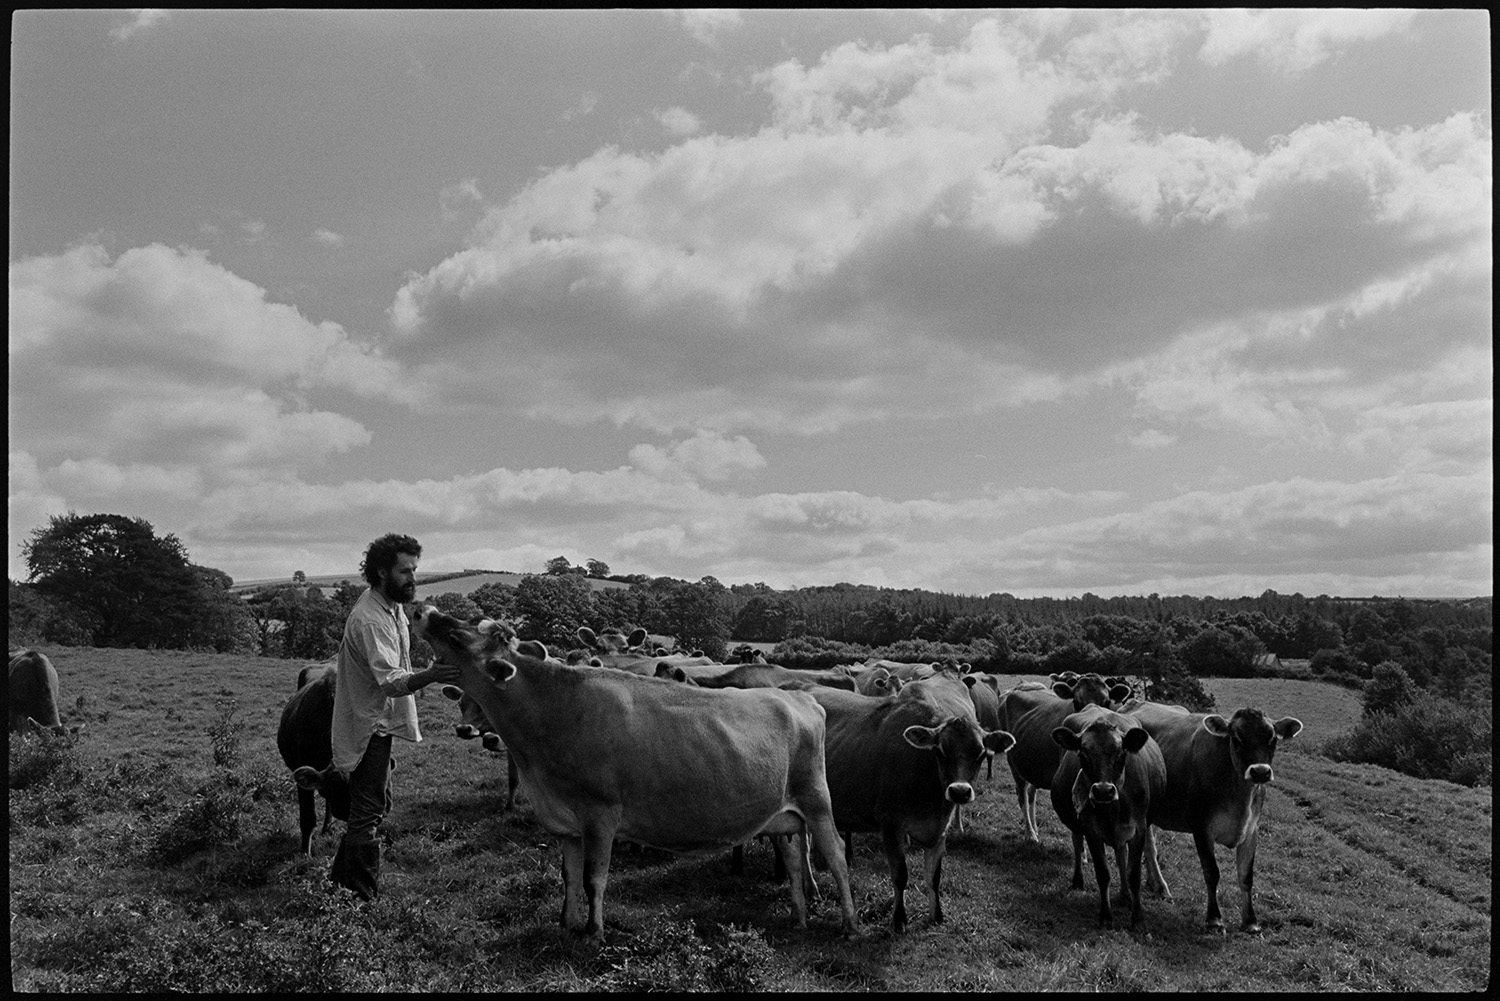 Farmer, cheesemaker bringing in herd of cows to be milked. 
[A herd of cows in a field at Park Farm, Umberleigh, going to be milked. Peter Charnley is stroking one of the cows in the foreground.]